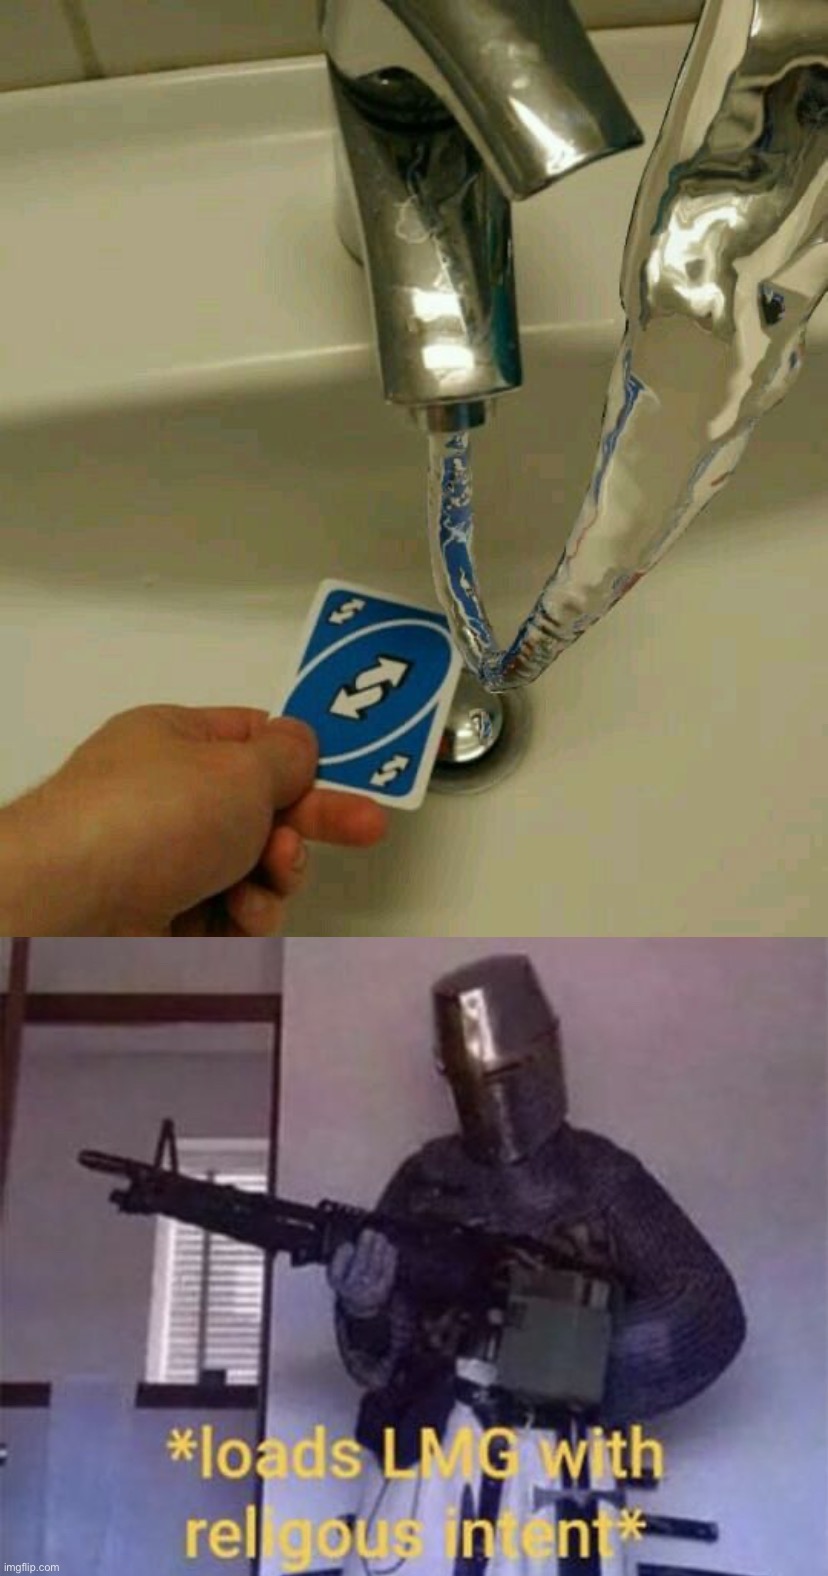 Uno reverse card water | image tagged in loads lmg with religious intent,memes,funny,cursed image | made w/ Imgflip meme maker